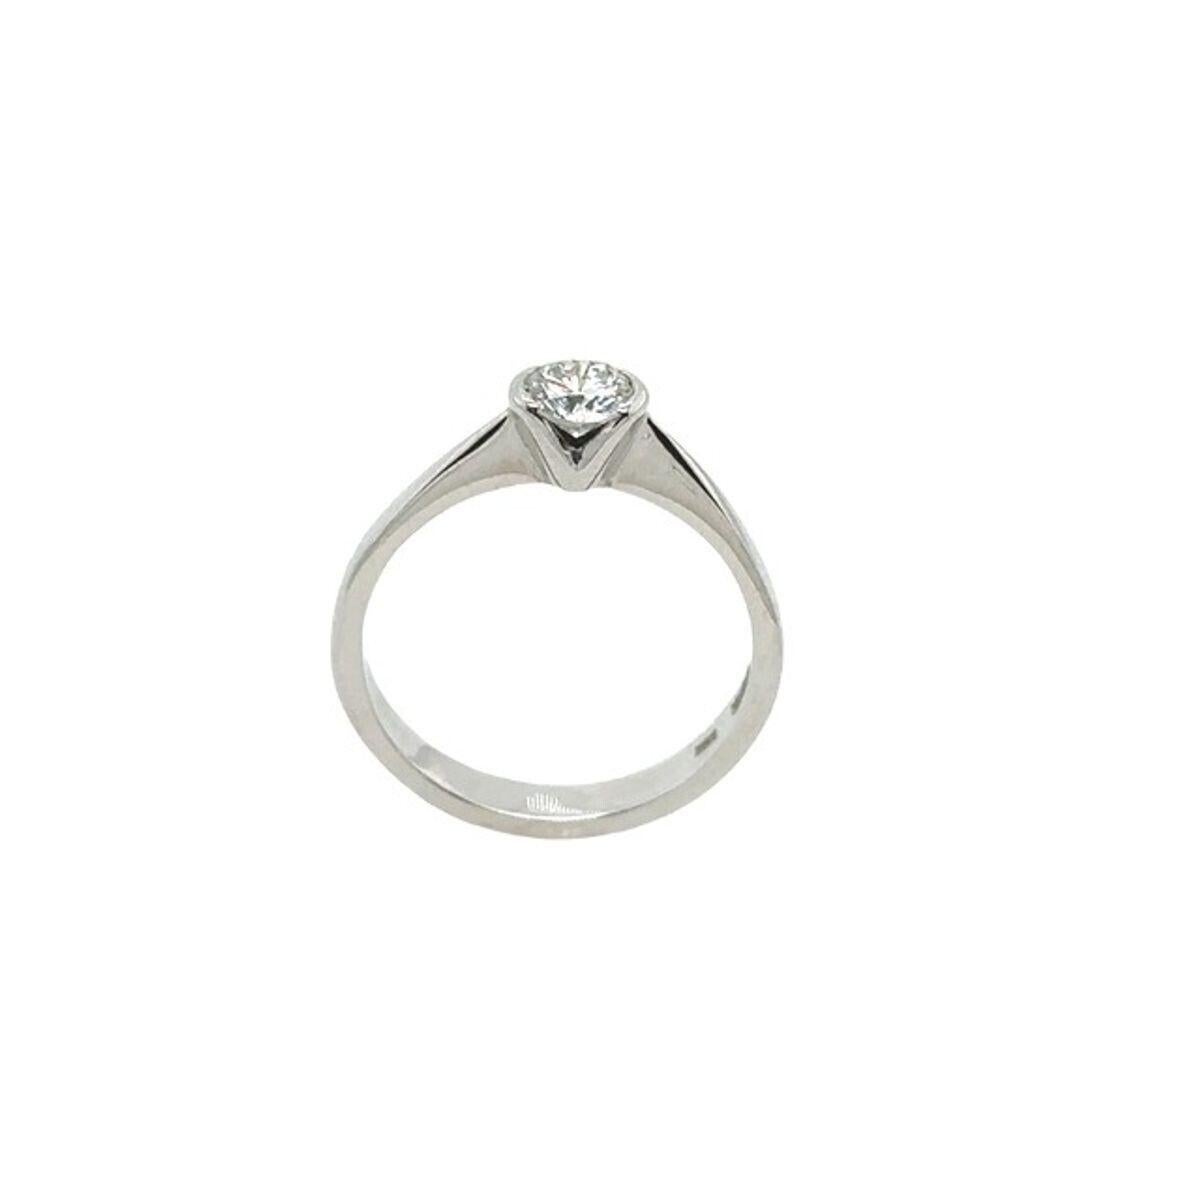 Round Cut Diamond Solitaire Ring Set with 0.34ct H/VS2 Natural Diamond in 18ct White Gold